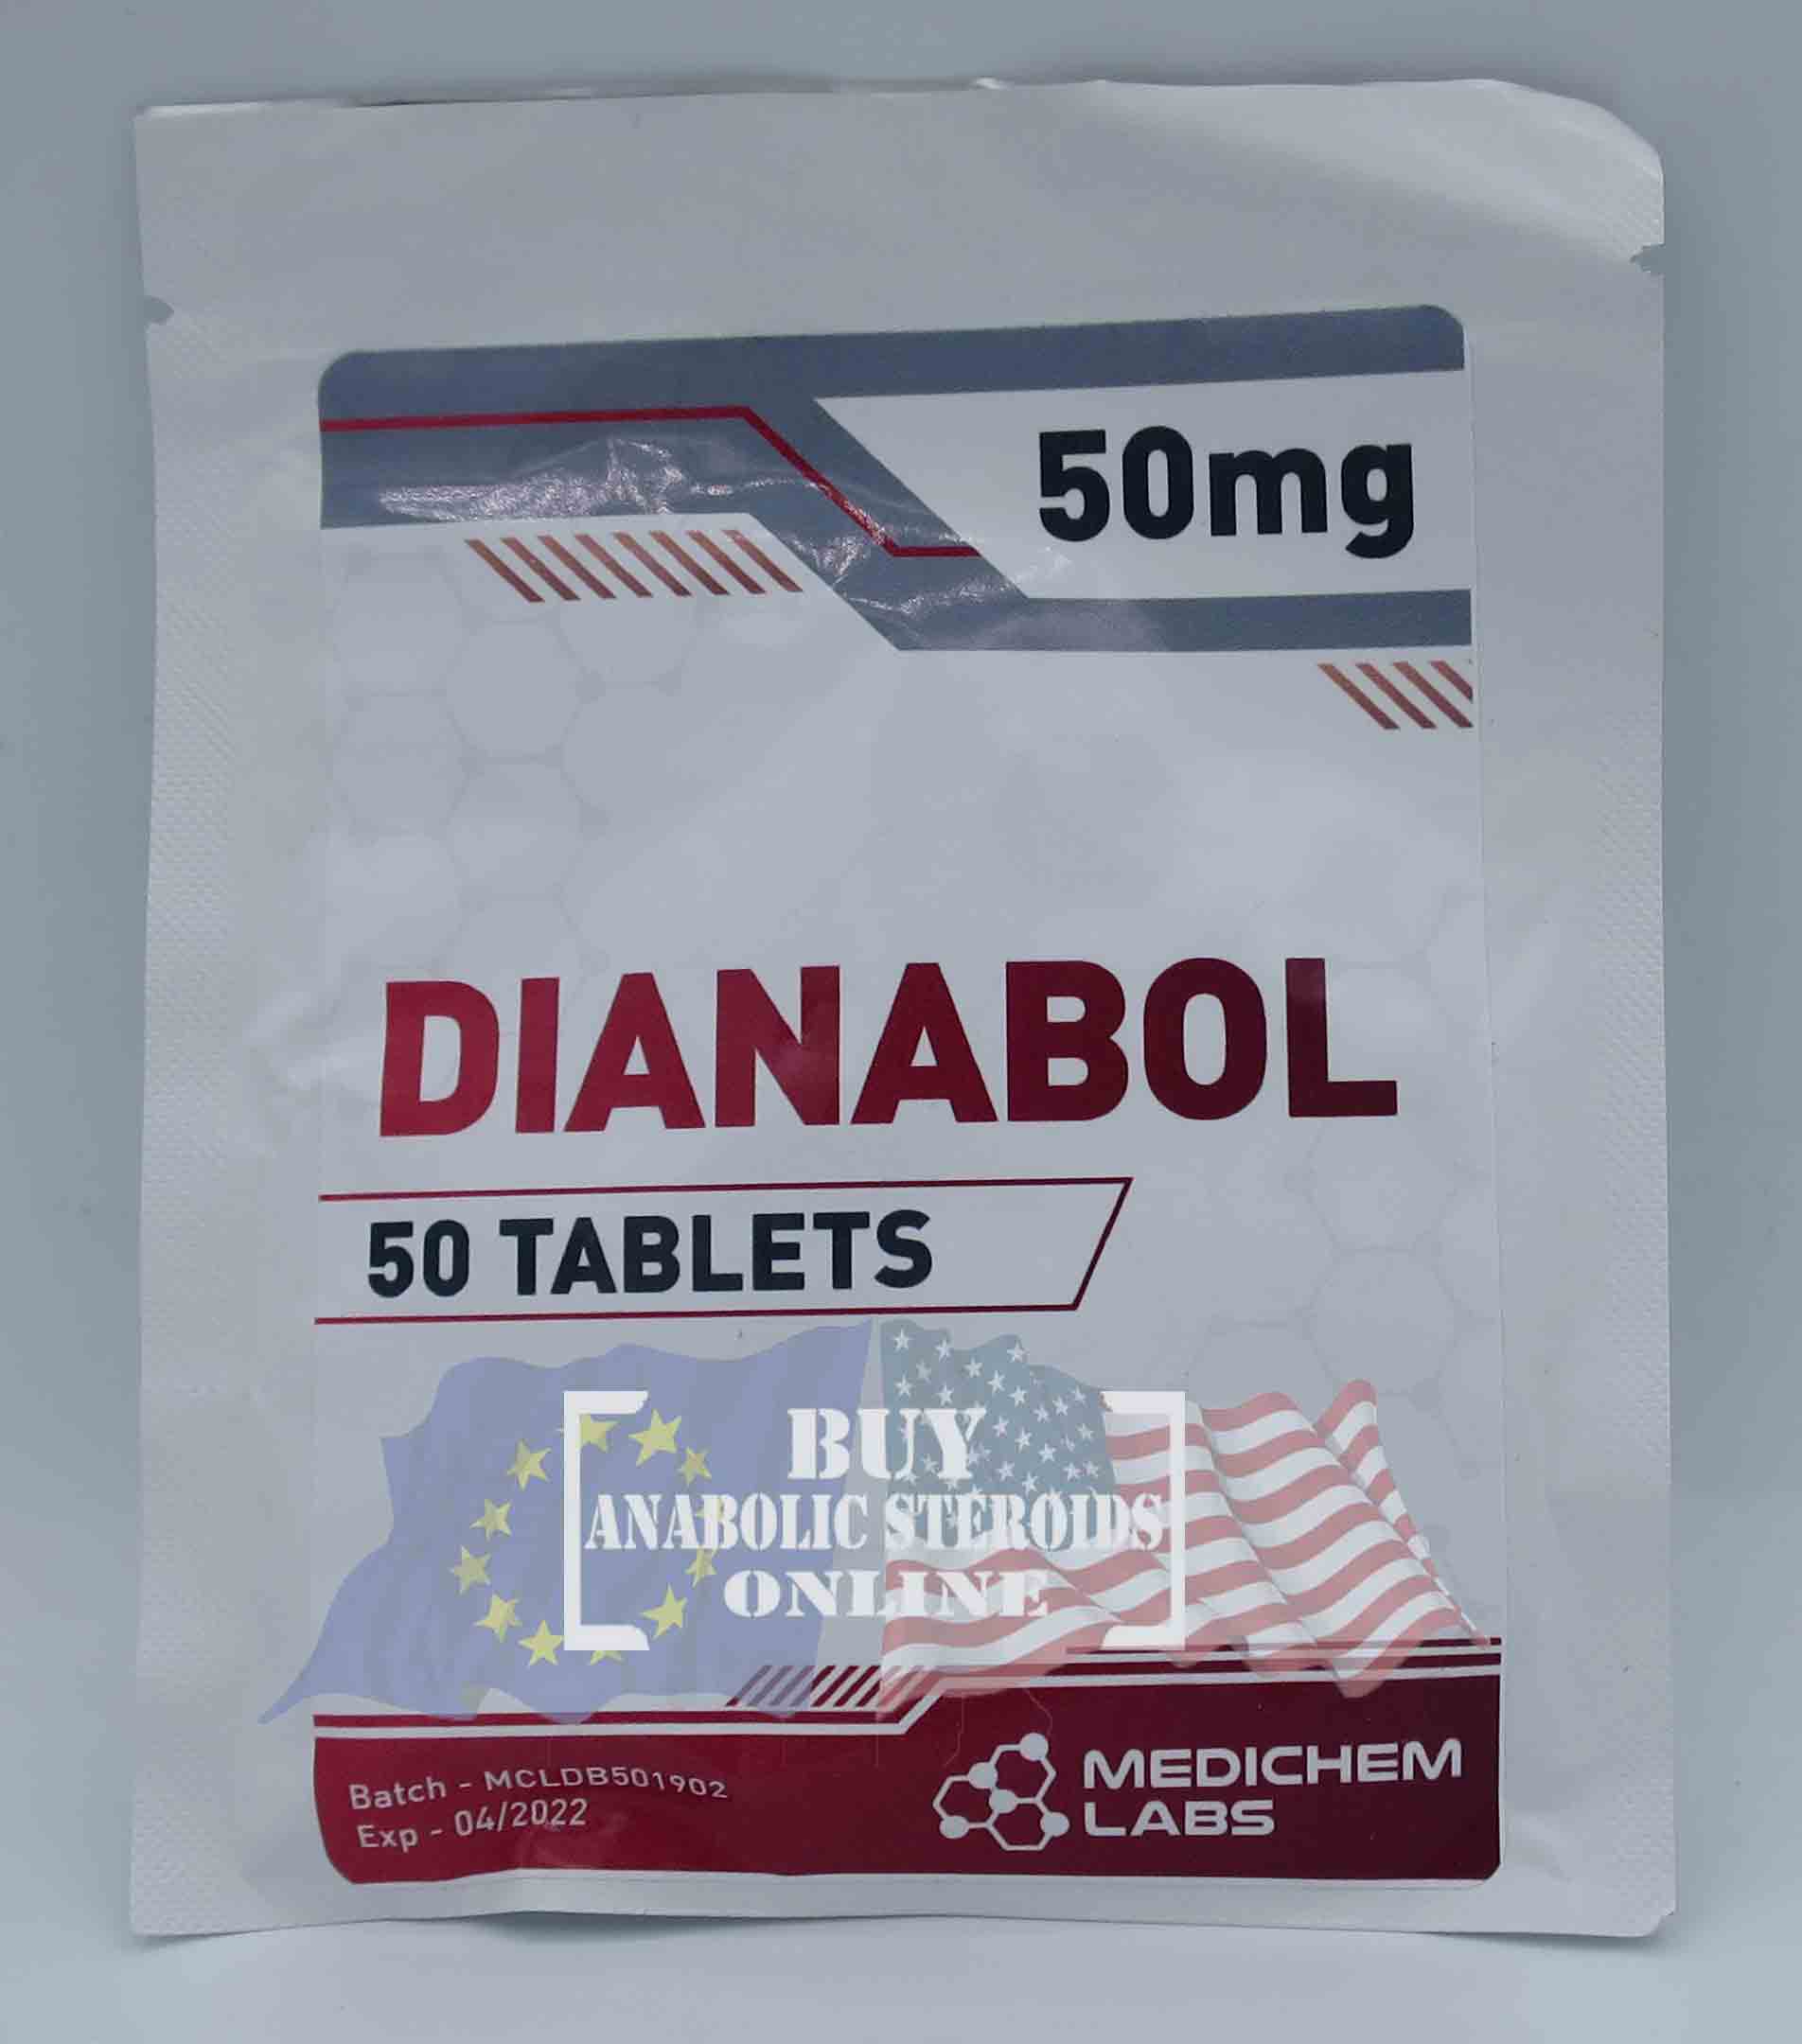 Dianabol 50mg for Sale | Anabolic Steroids | BuyAnavarforSale